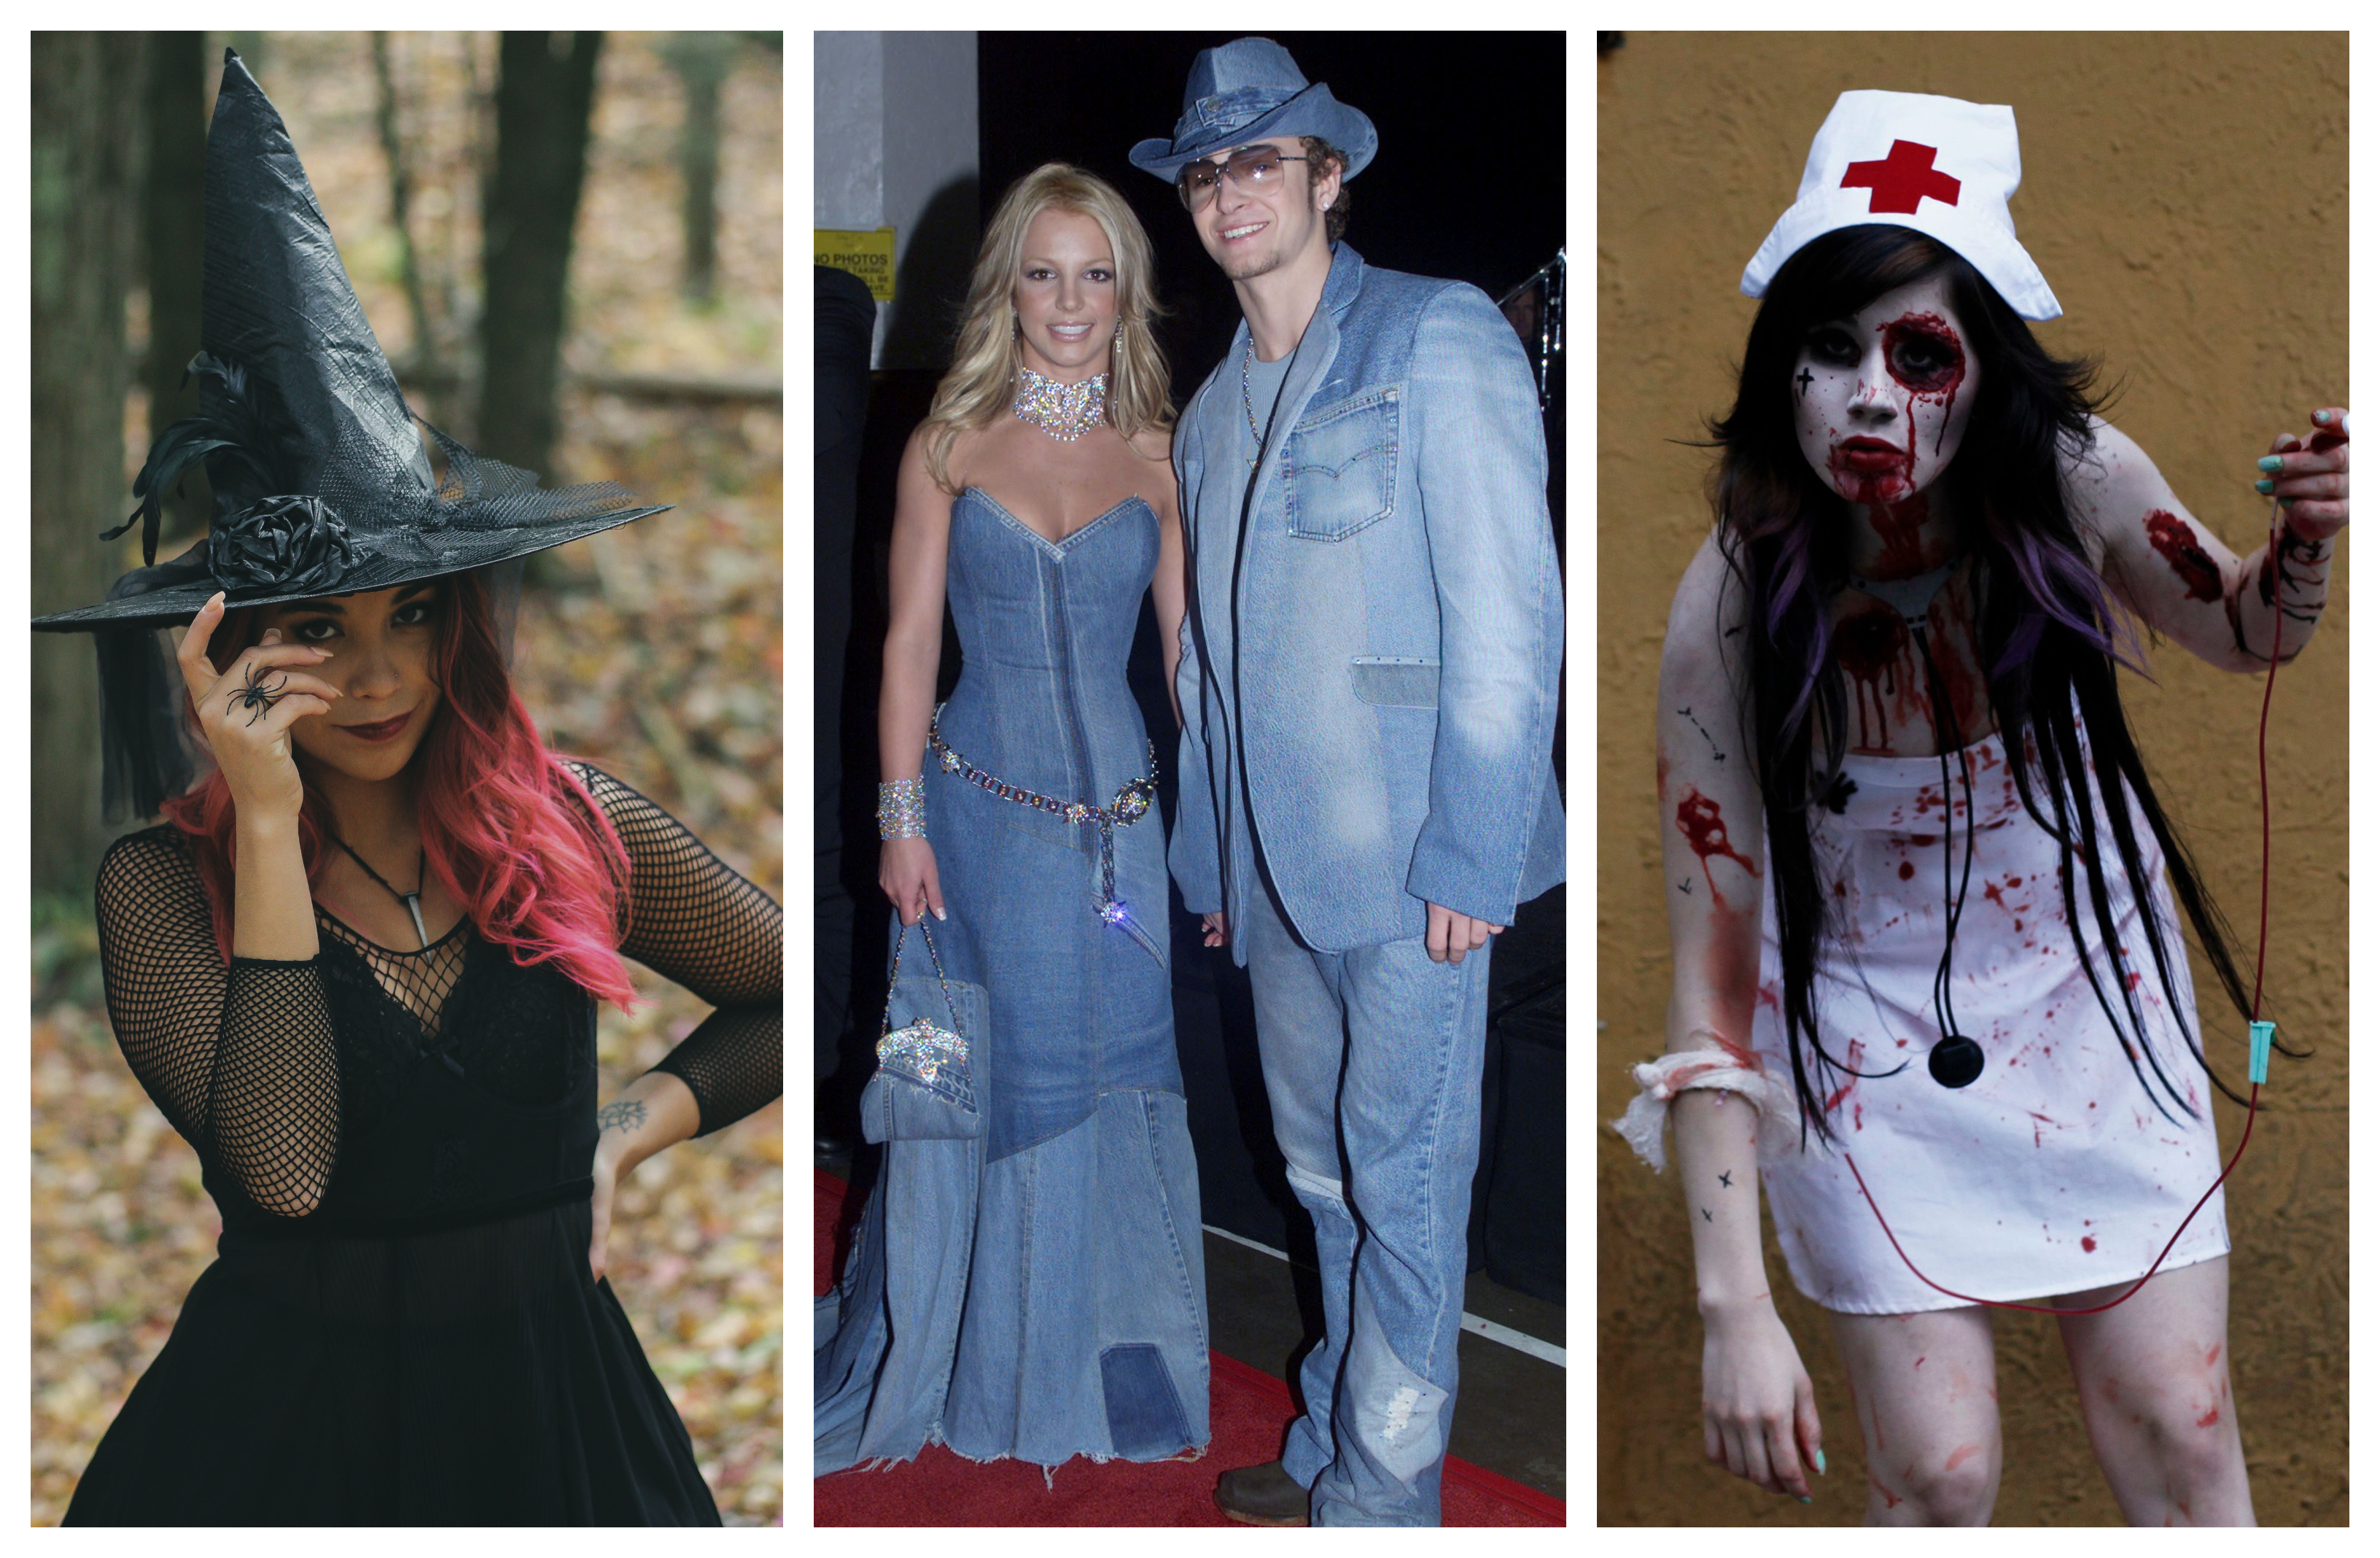 Psychologists Explain the Meaning Behind Halloween Costumes